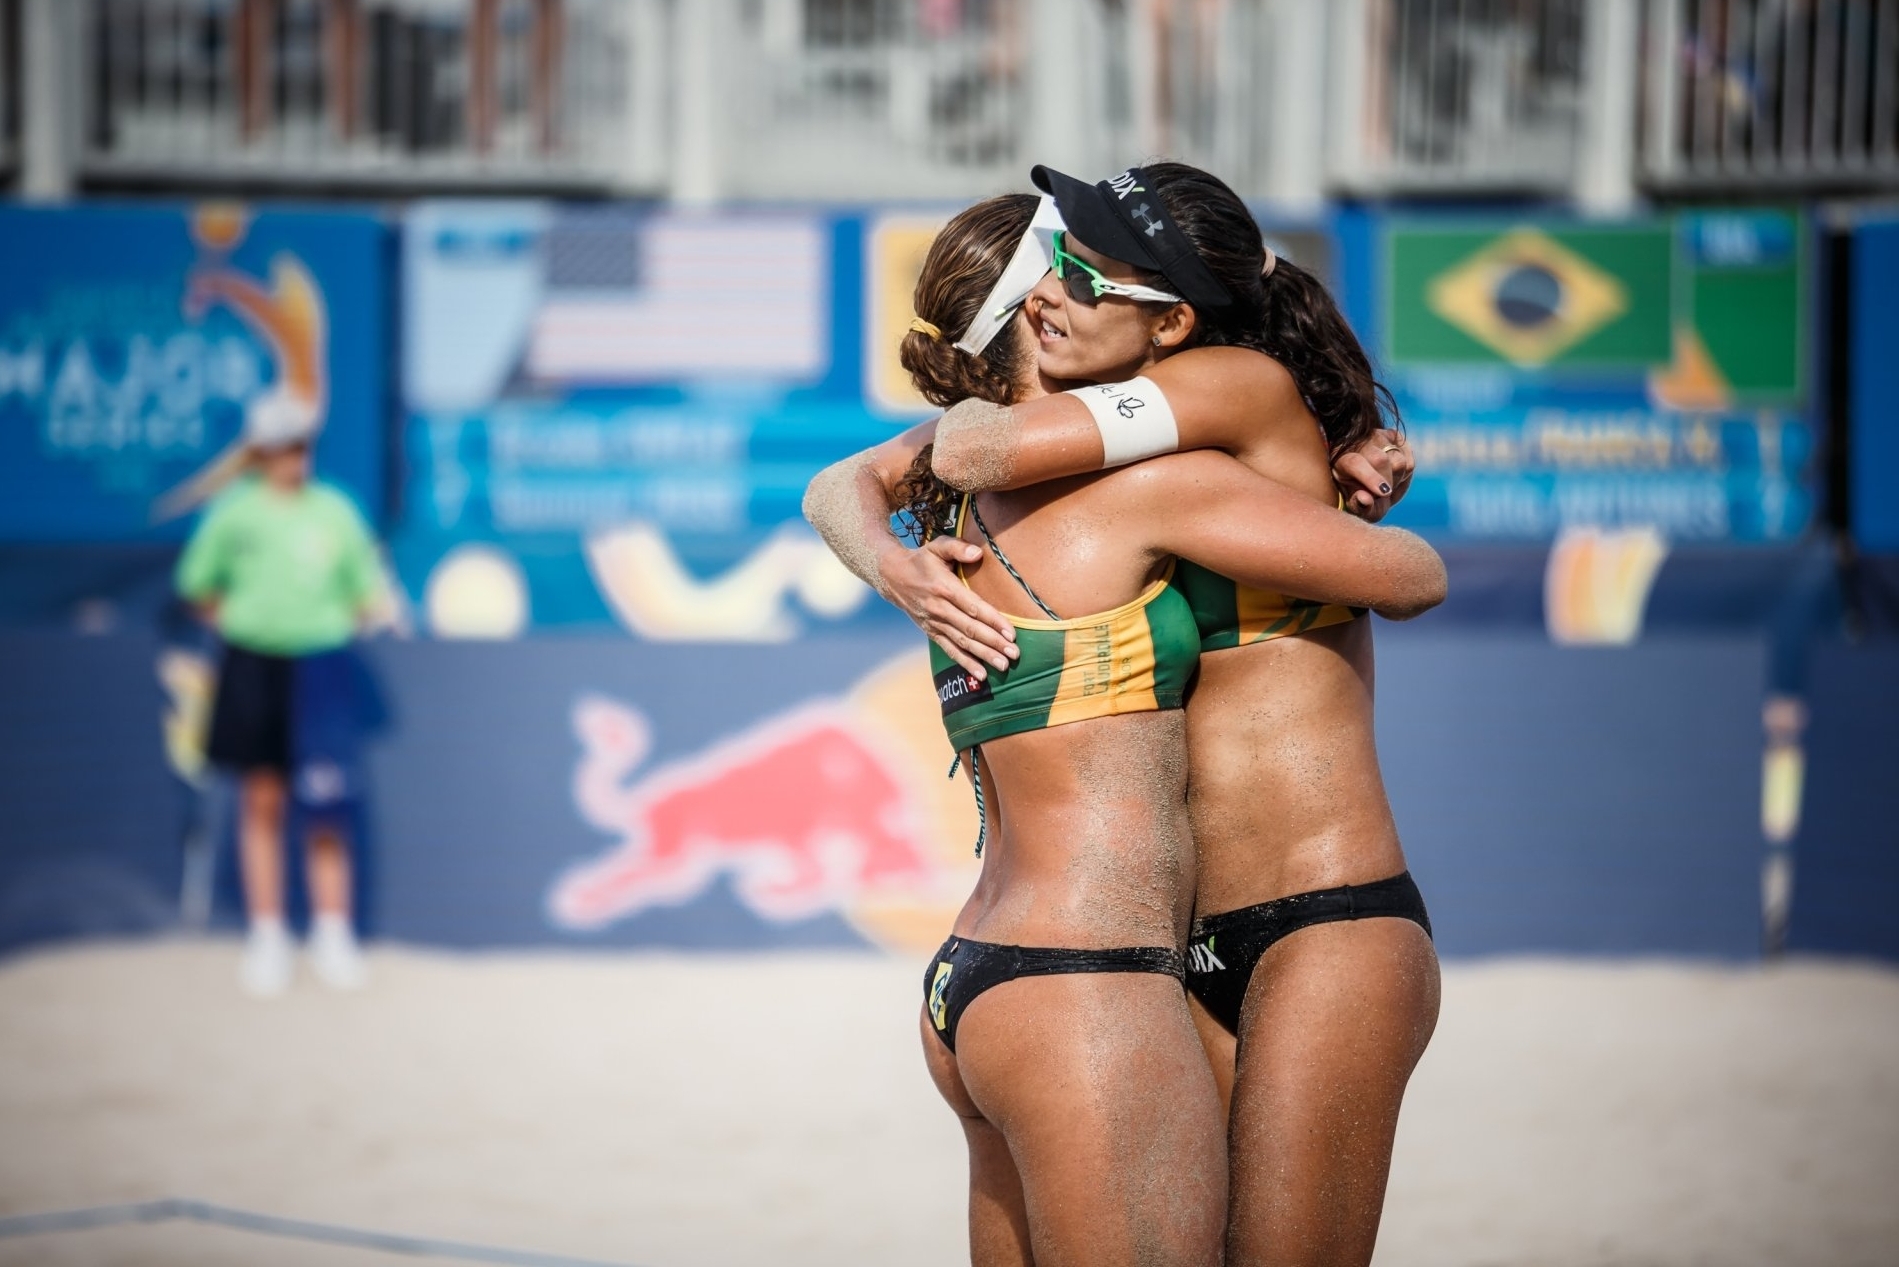 Larissa/Talita have cruised into the knockout stages